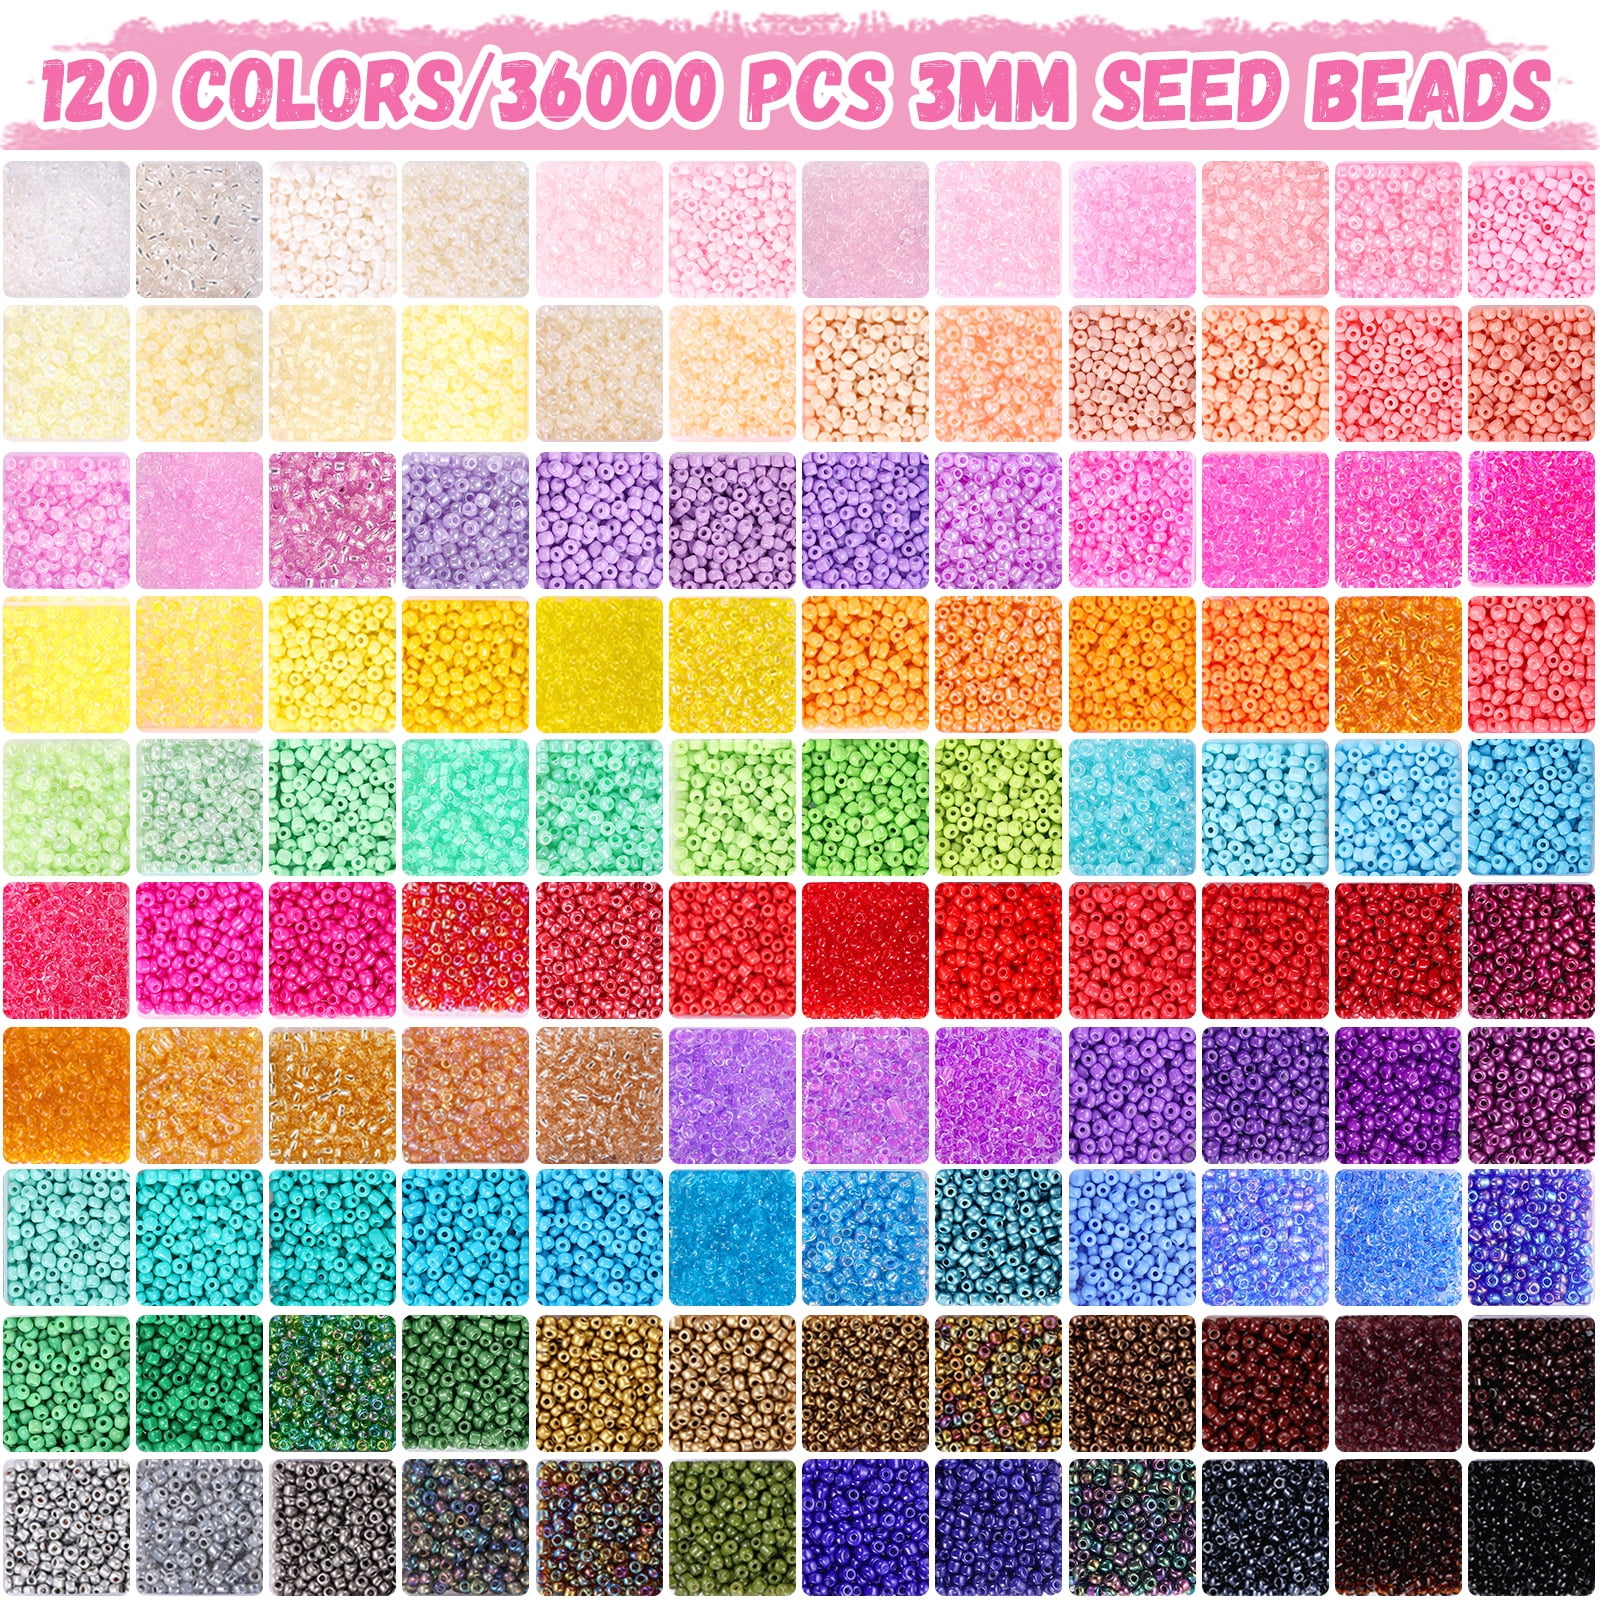 Funtopia 4000pcs 4mm Seed Beads for Bracelets Making Kit, 24 Colors Small  Glass Beads for Jewelry Making, Friendship Bracelet Kit with Alphabet  Letter